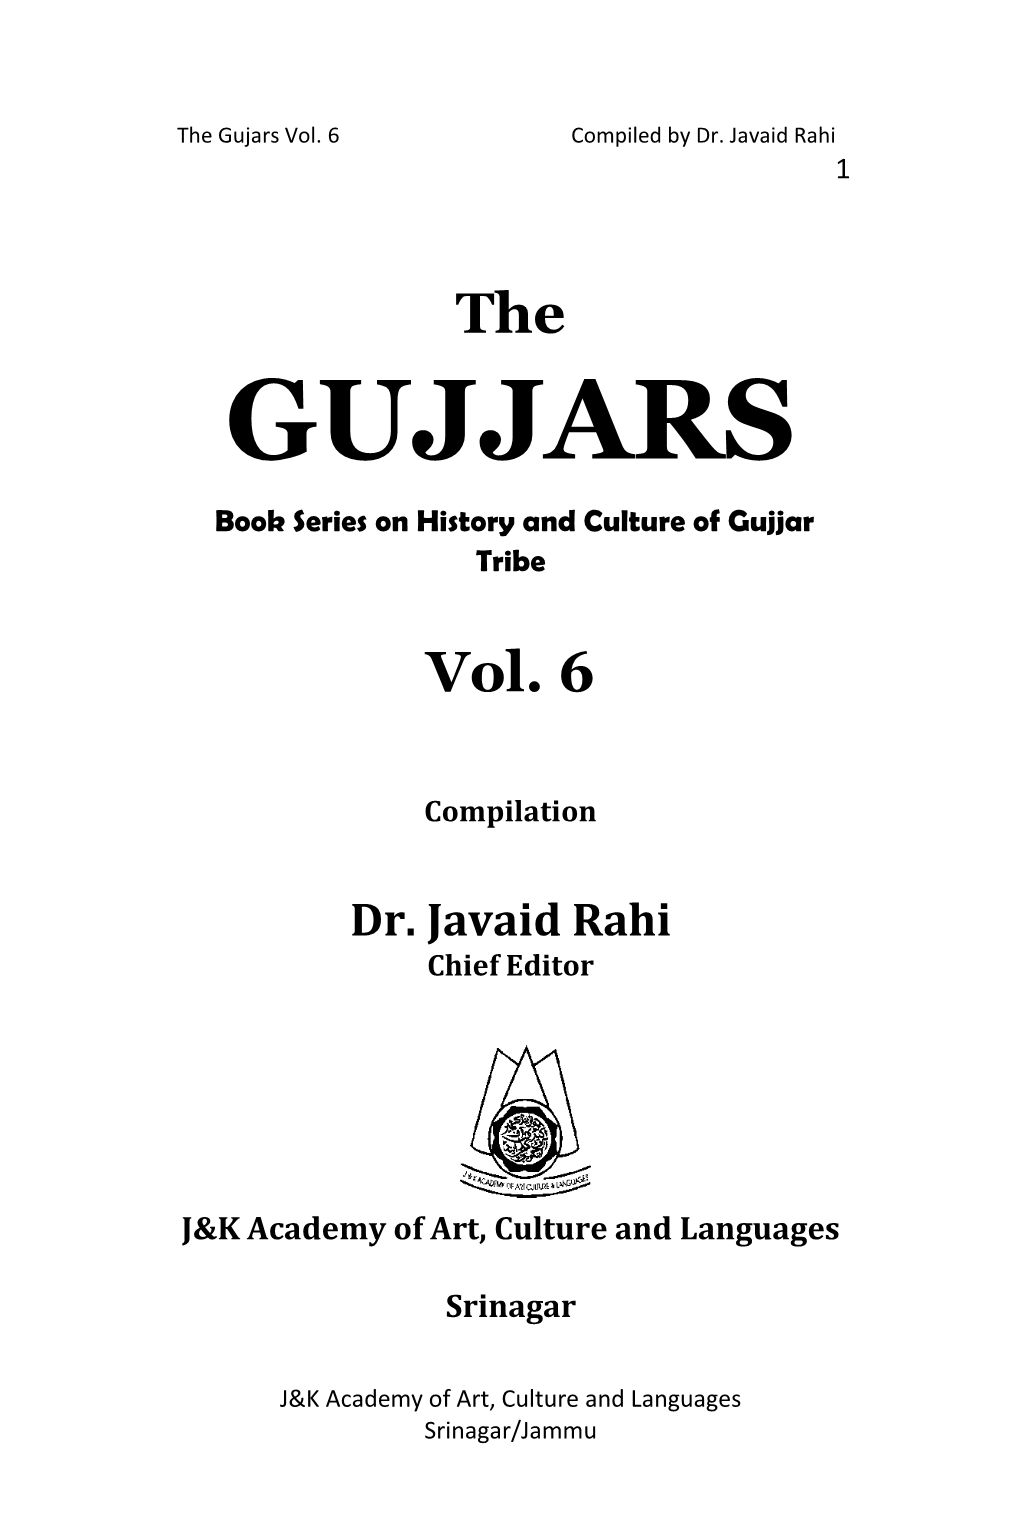 GUJJARS Book Series on History and Culture of Gujjar Tribe